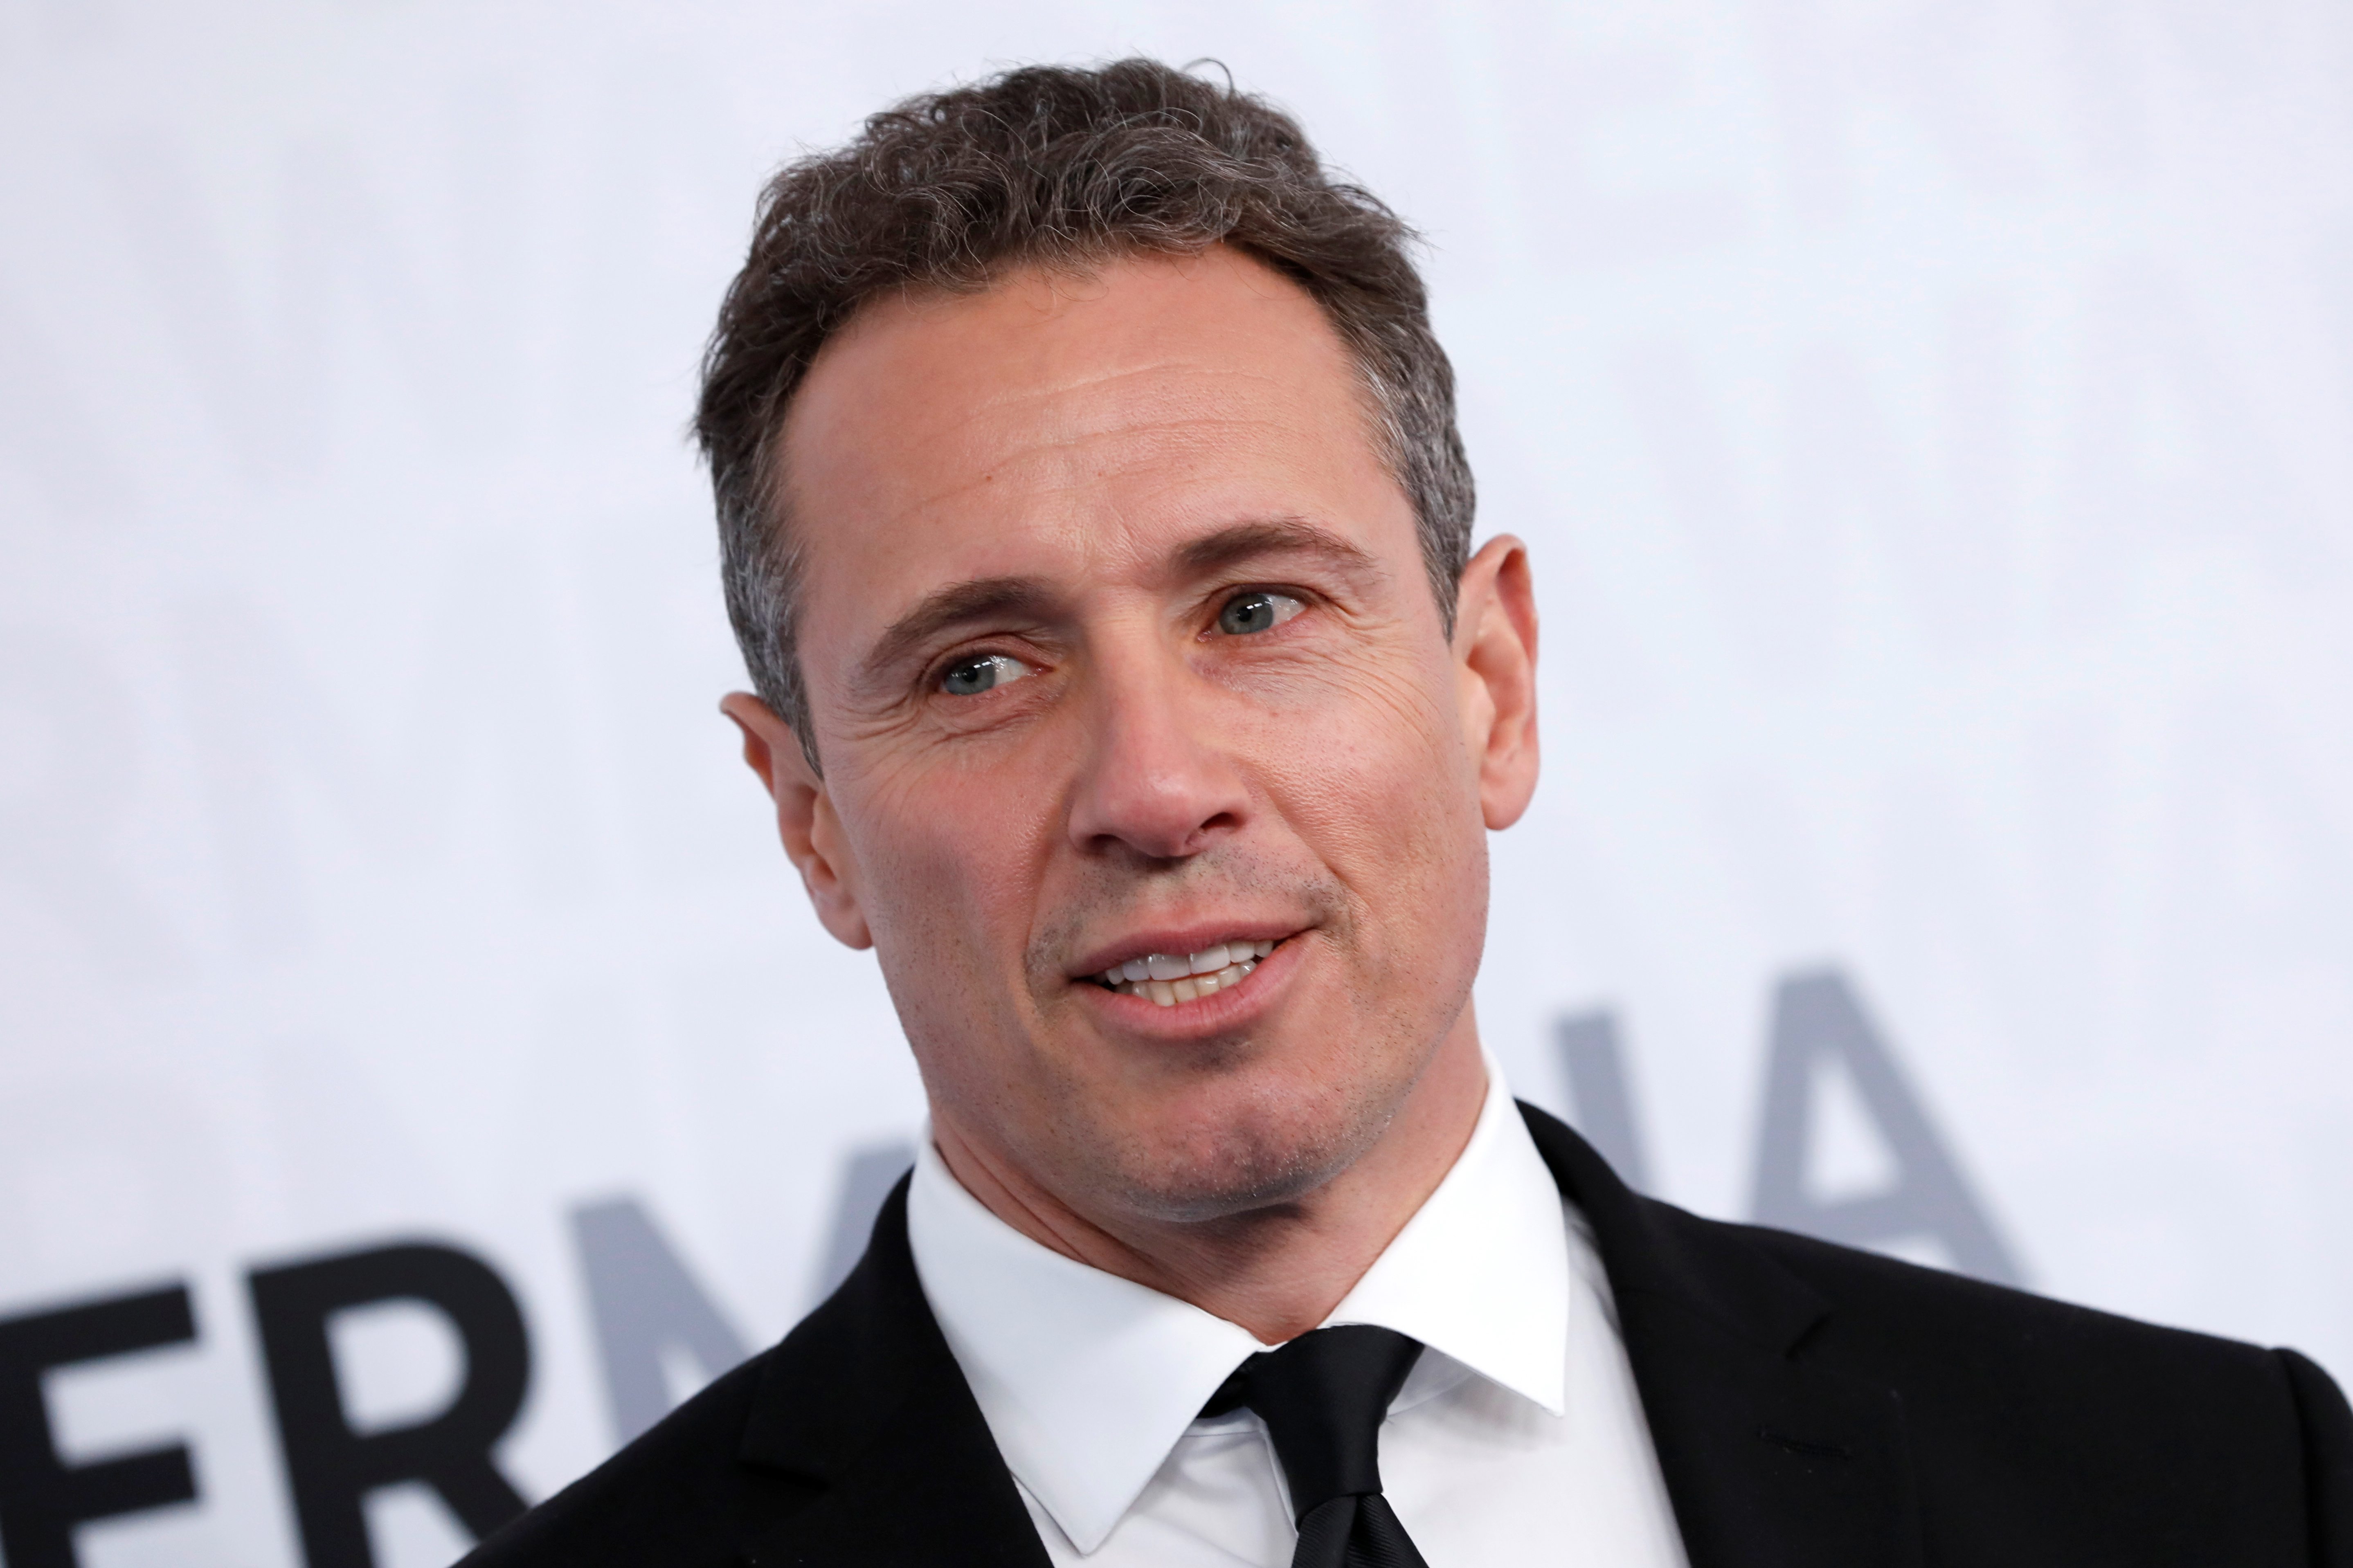 CNN TV news anchor Chris Cuomo poses as he arrives at the WarnerMedia Upfront event in New York City, New York, USA, May 15, 2019. REUTERS / Mike Segar